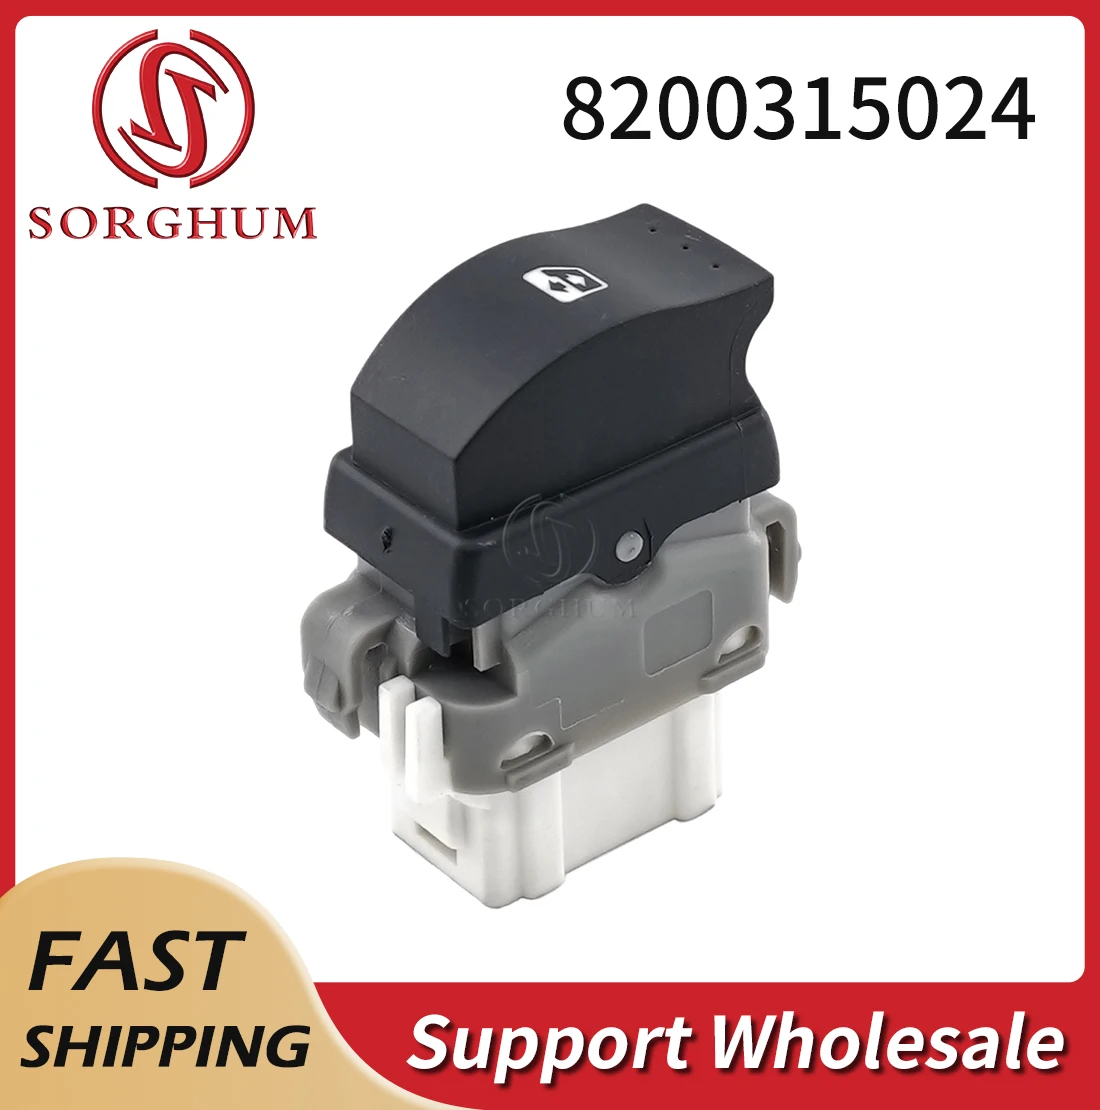 Sorghum 8200315024 Car Single Power Window Lifter Switch Button For Renault Megane MK2 Dynamique Laguna Espace Scenic 8200002451